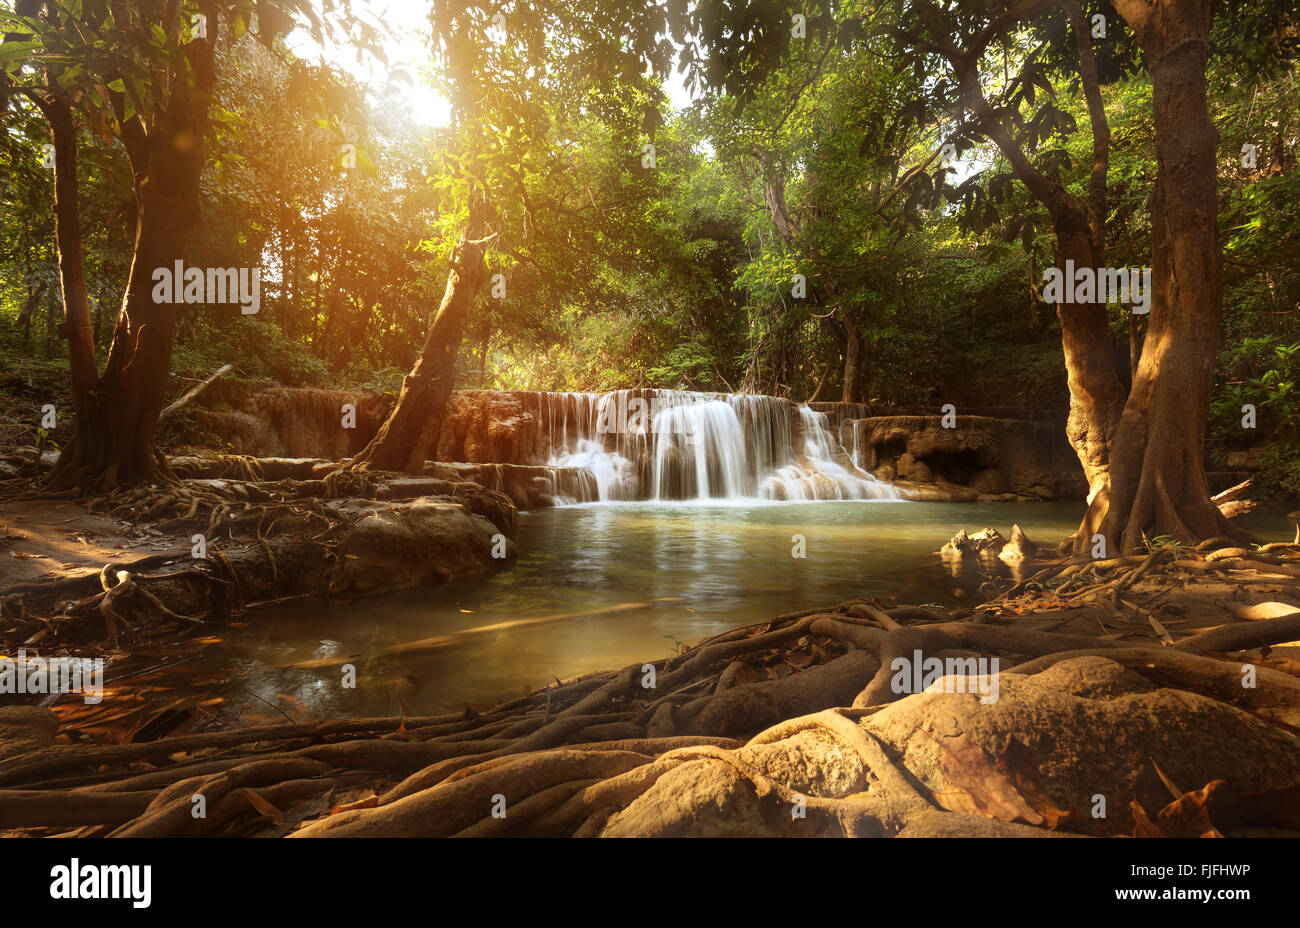 beautiful waterfall in tropical forest Stock Photo